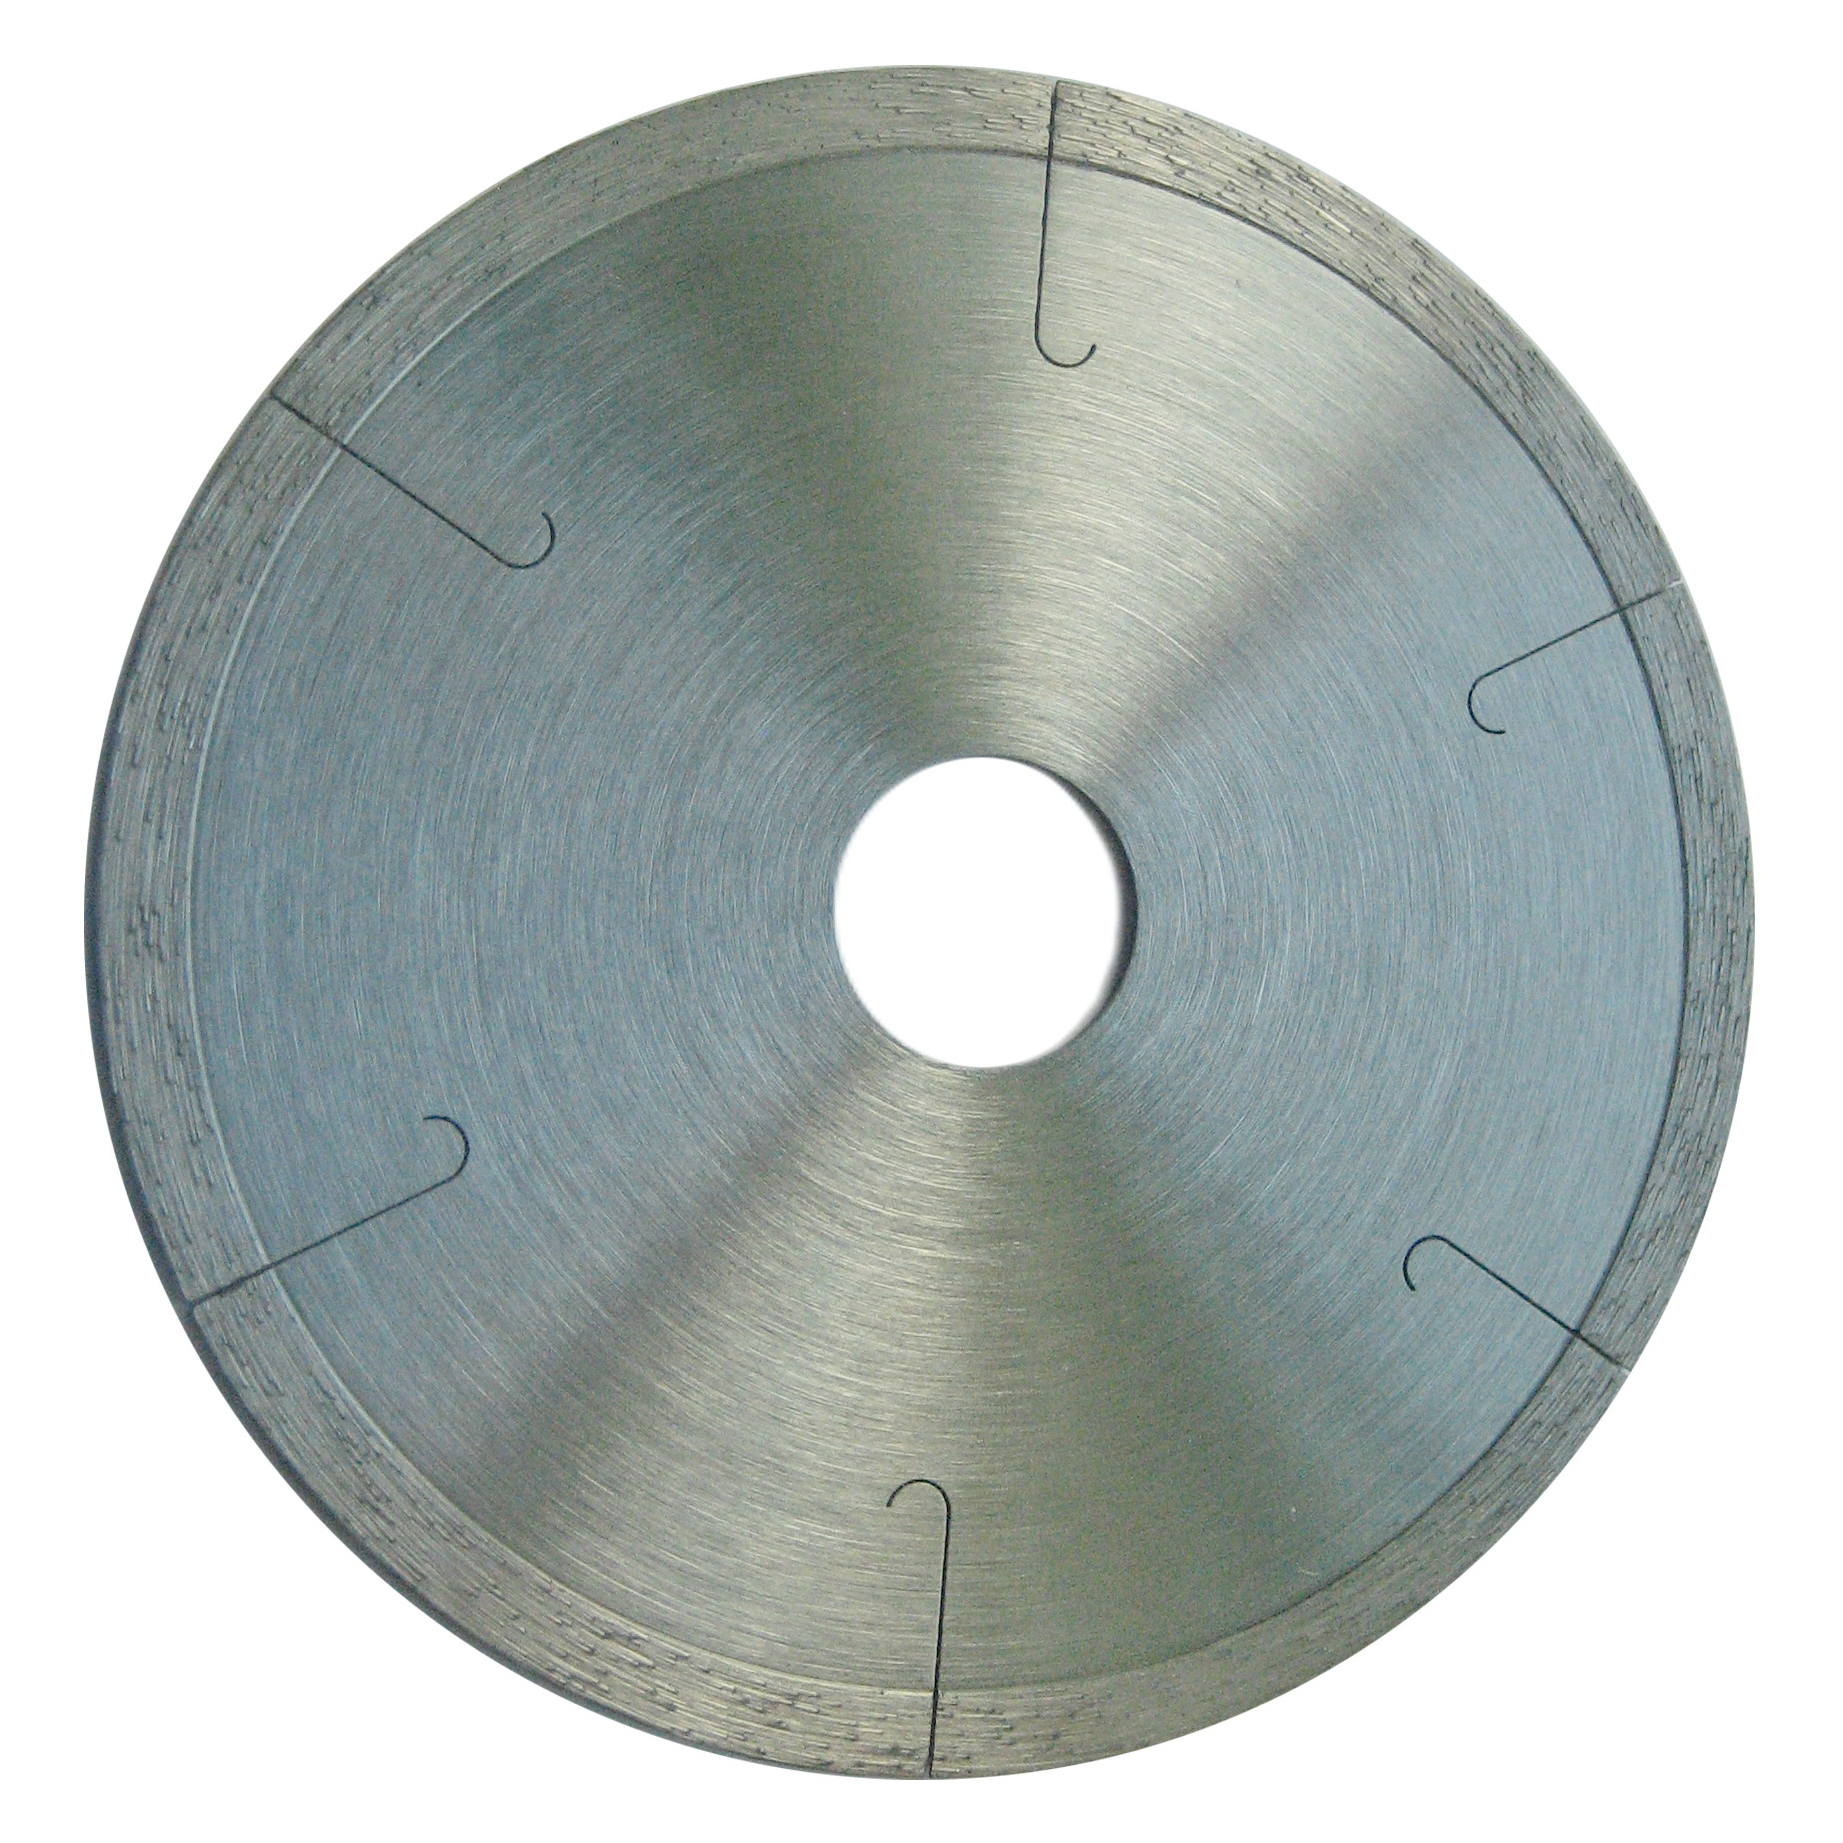 Sintered Continuous Rim Wet Cutting Tile Blade